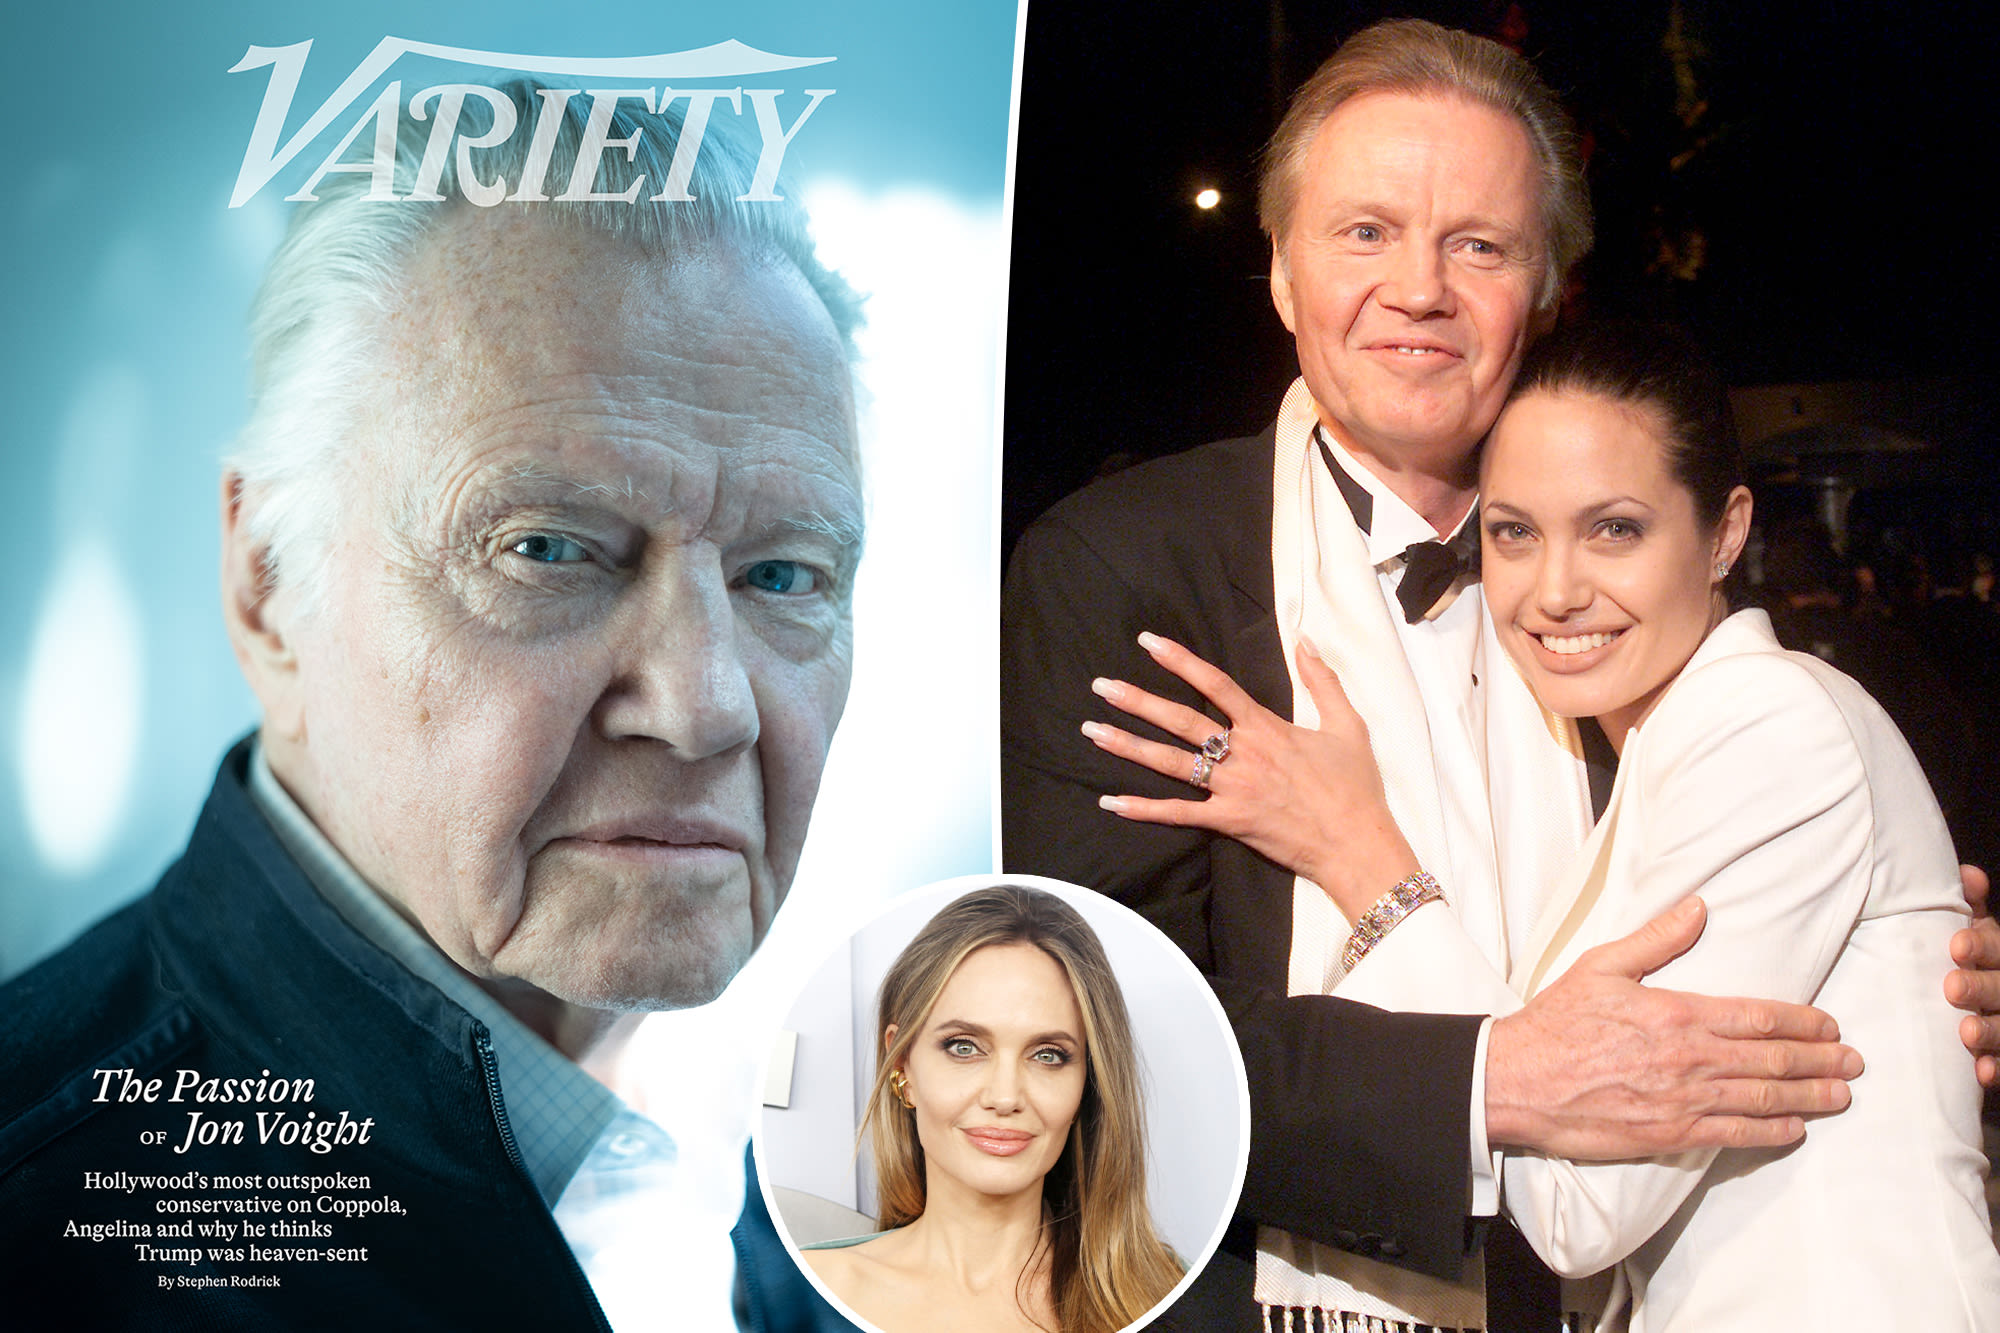 Jon Voight slams ‘ignorant’ daughter Angelina Jolie’s pro-Palestinian stance: ‘She’s been influenced by antisemitic people’